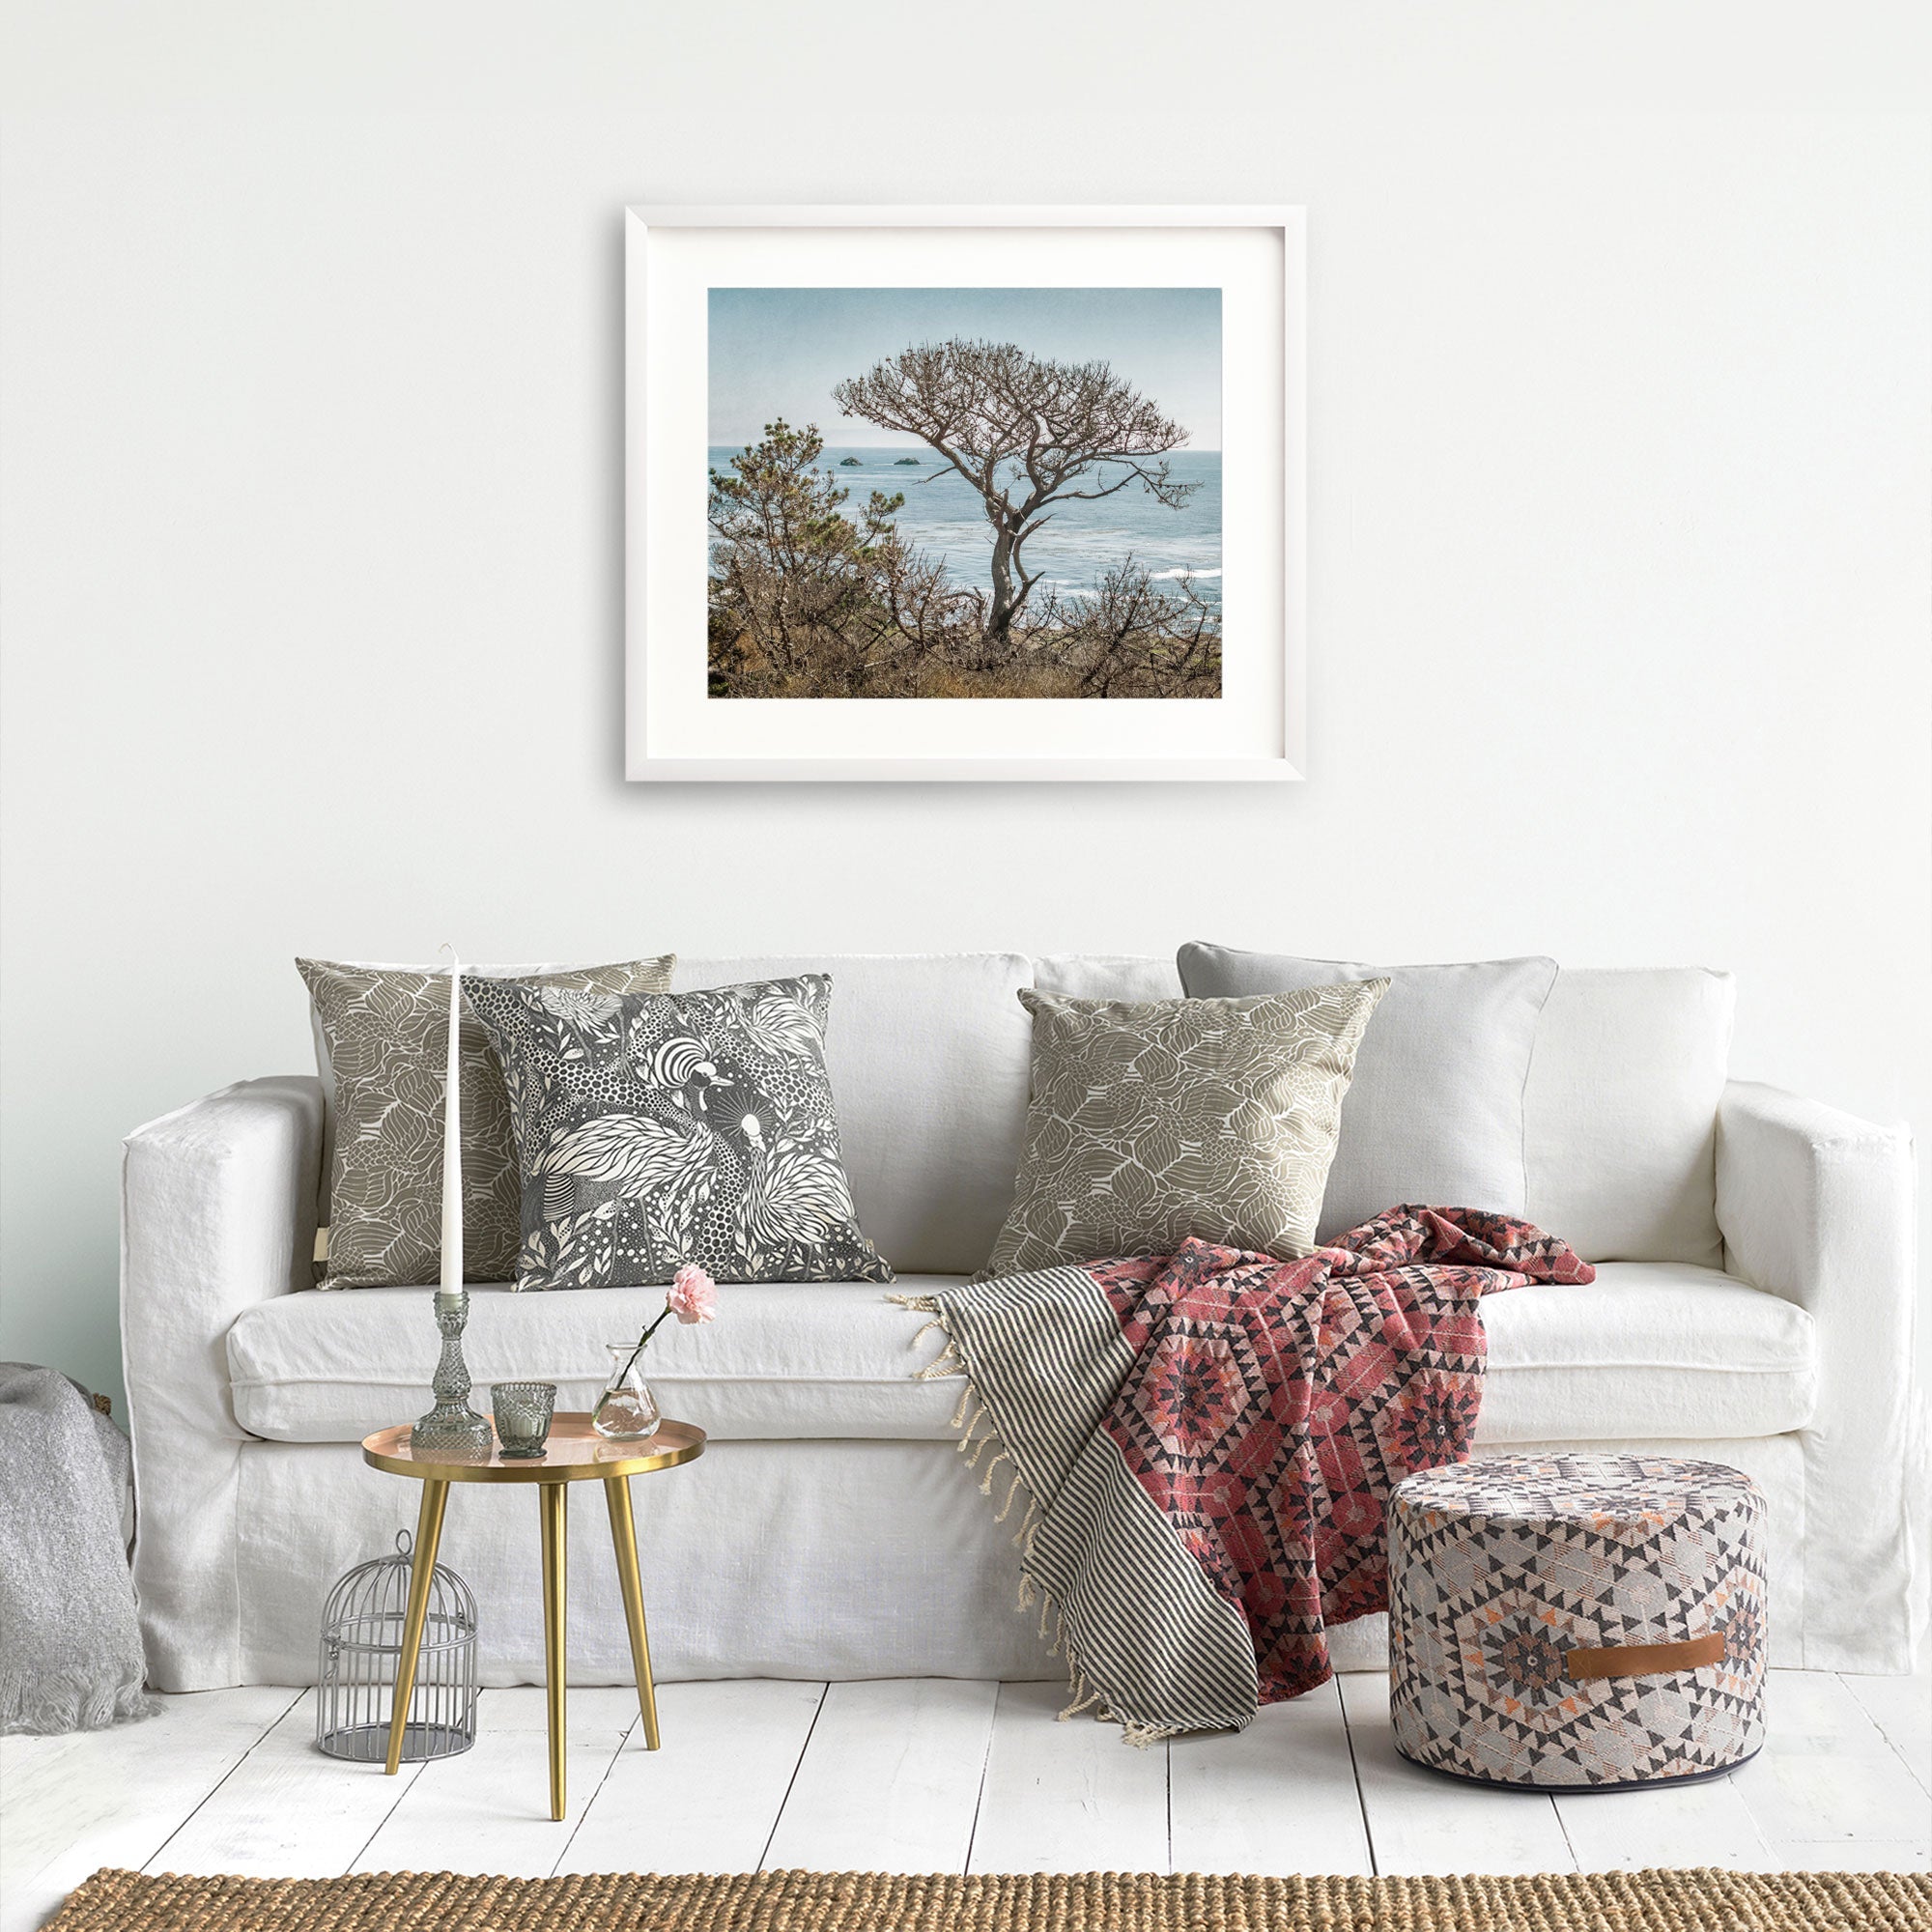 A cozy living room with a white sofa adorned with decorative pillows, a red patterned throw blanket, a small round table with a vase and books, and unframed Offley Green California Landscape Art in Big Sur, &#39;Wind Blown Tree&#39; photography on the wall.